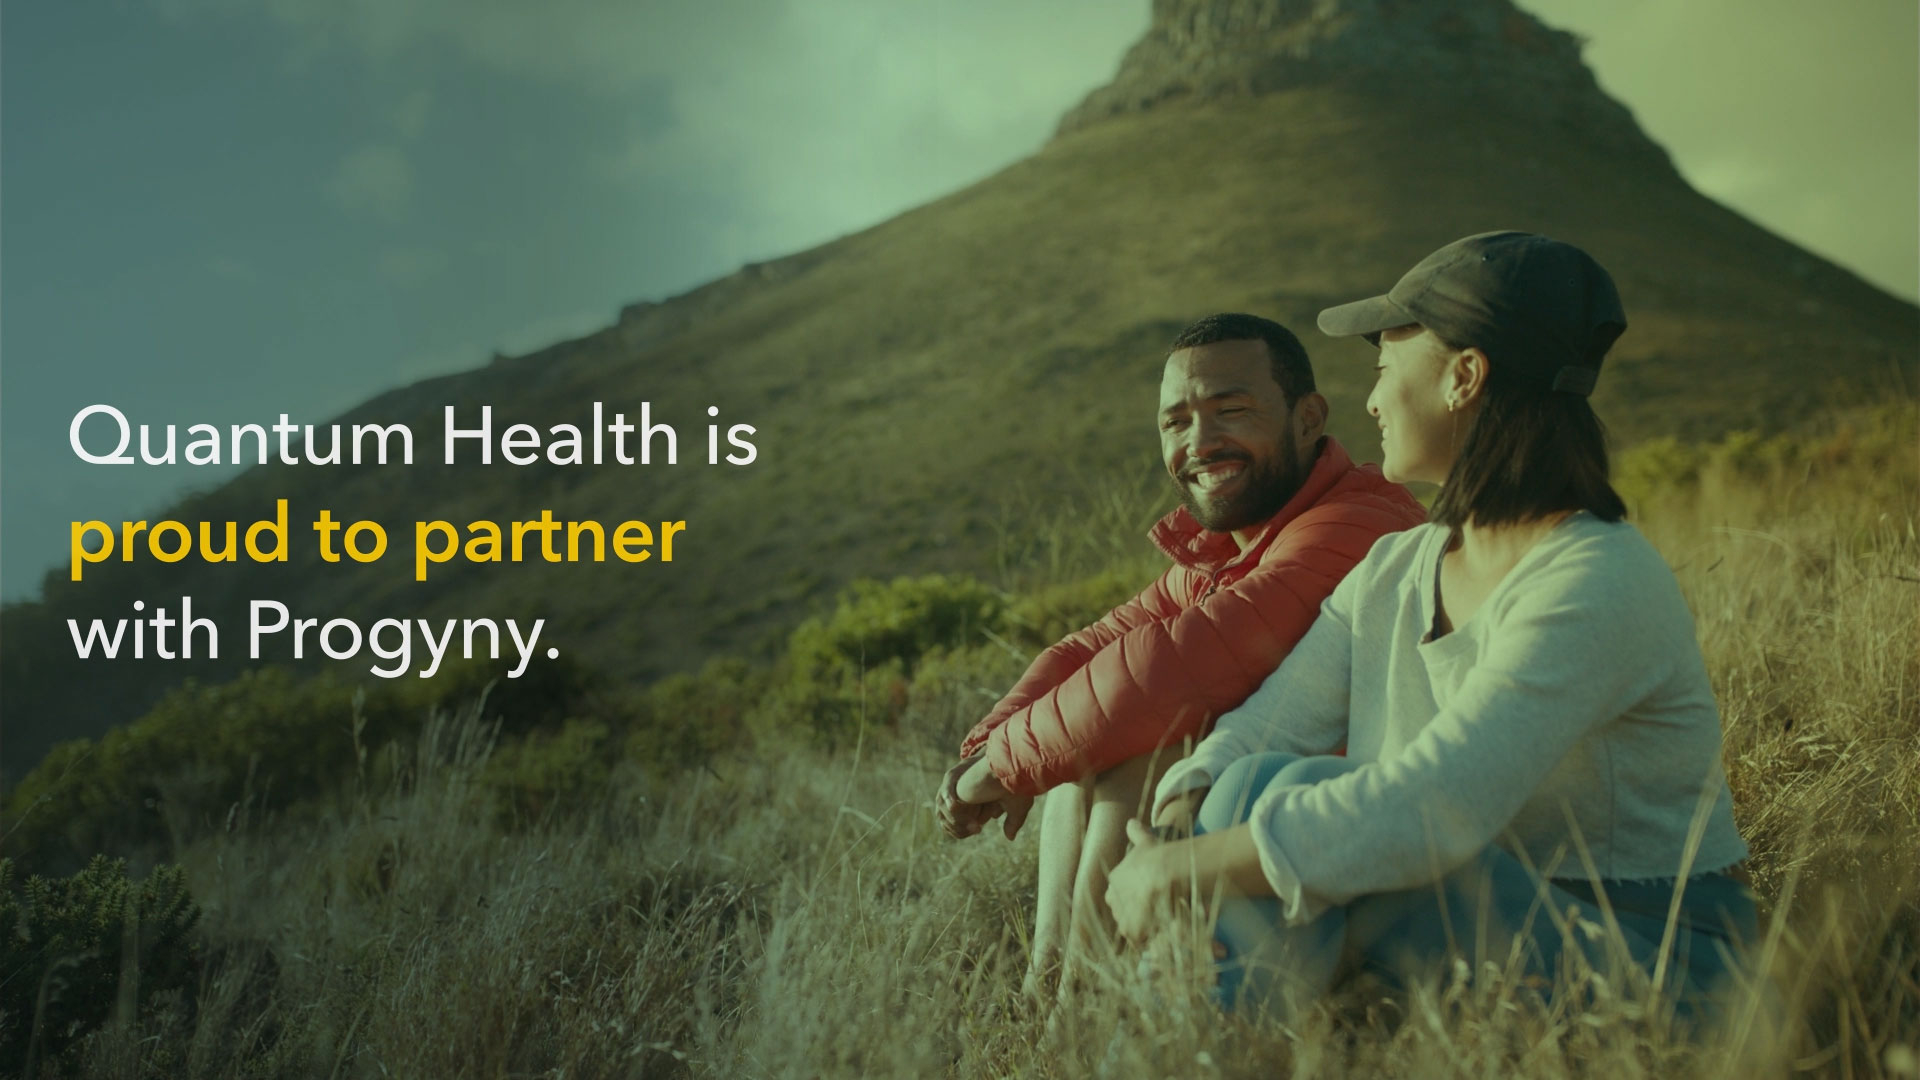 Quantum Health is proud to partner with Progyny